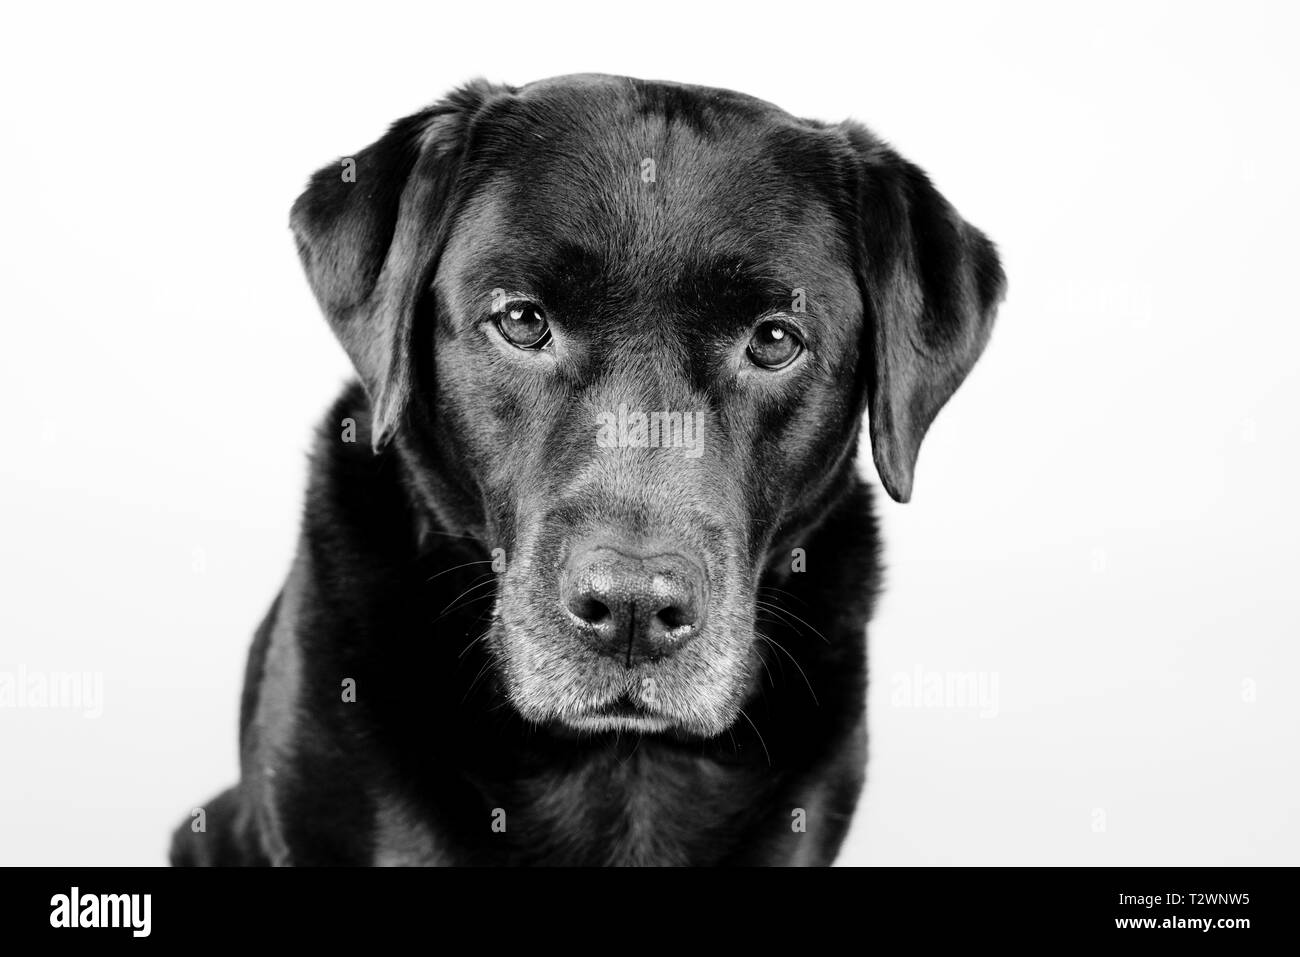 Black and white portrait of an old brown labrador dog, staring into the camera. in front of an white background Stock Photo